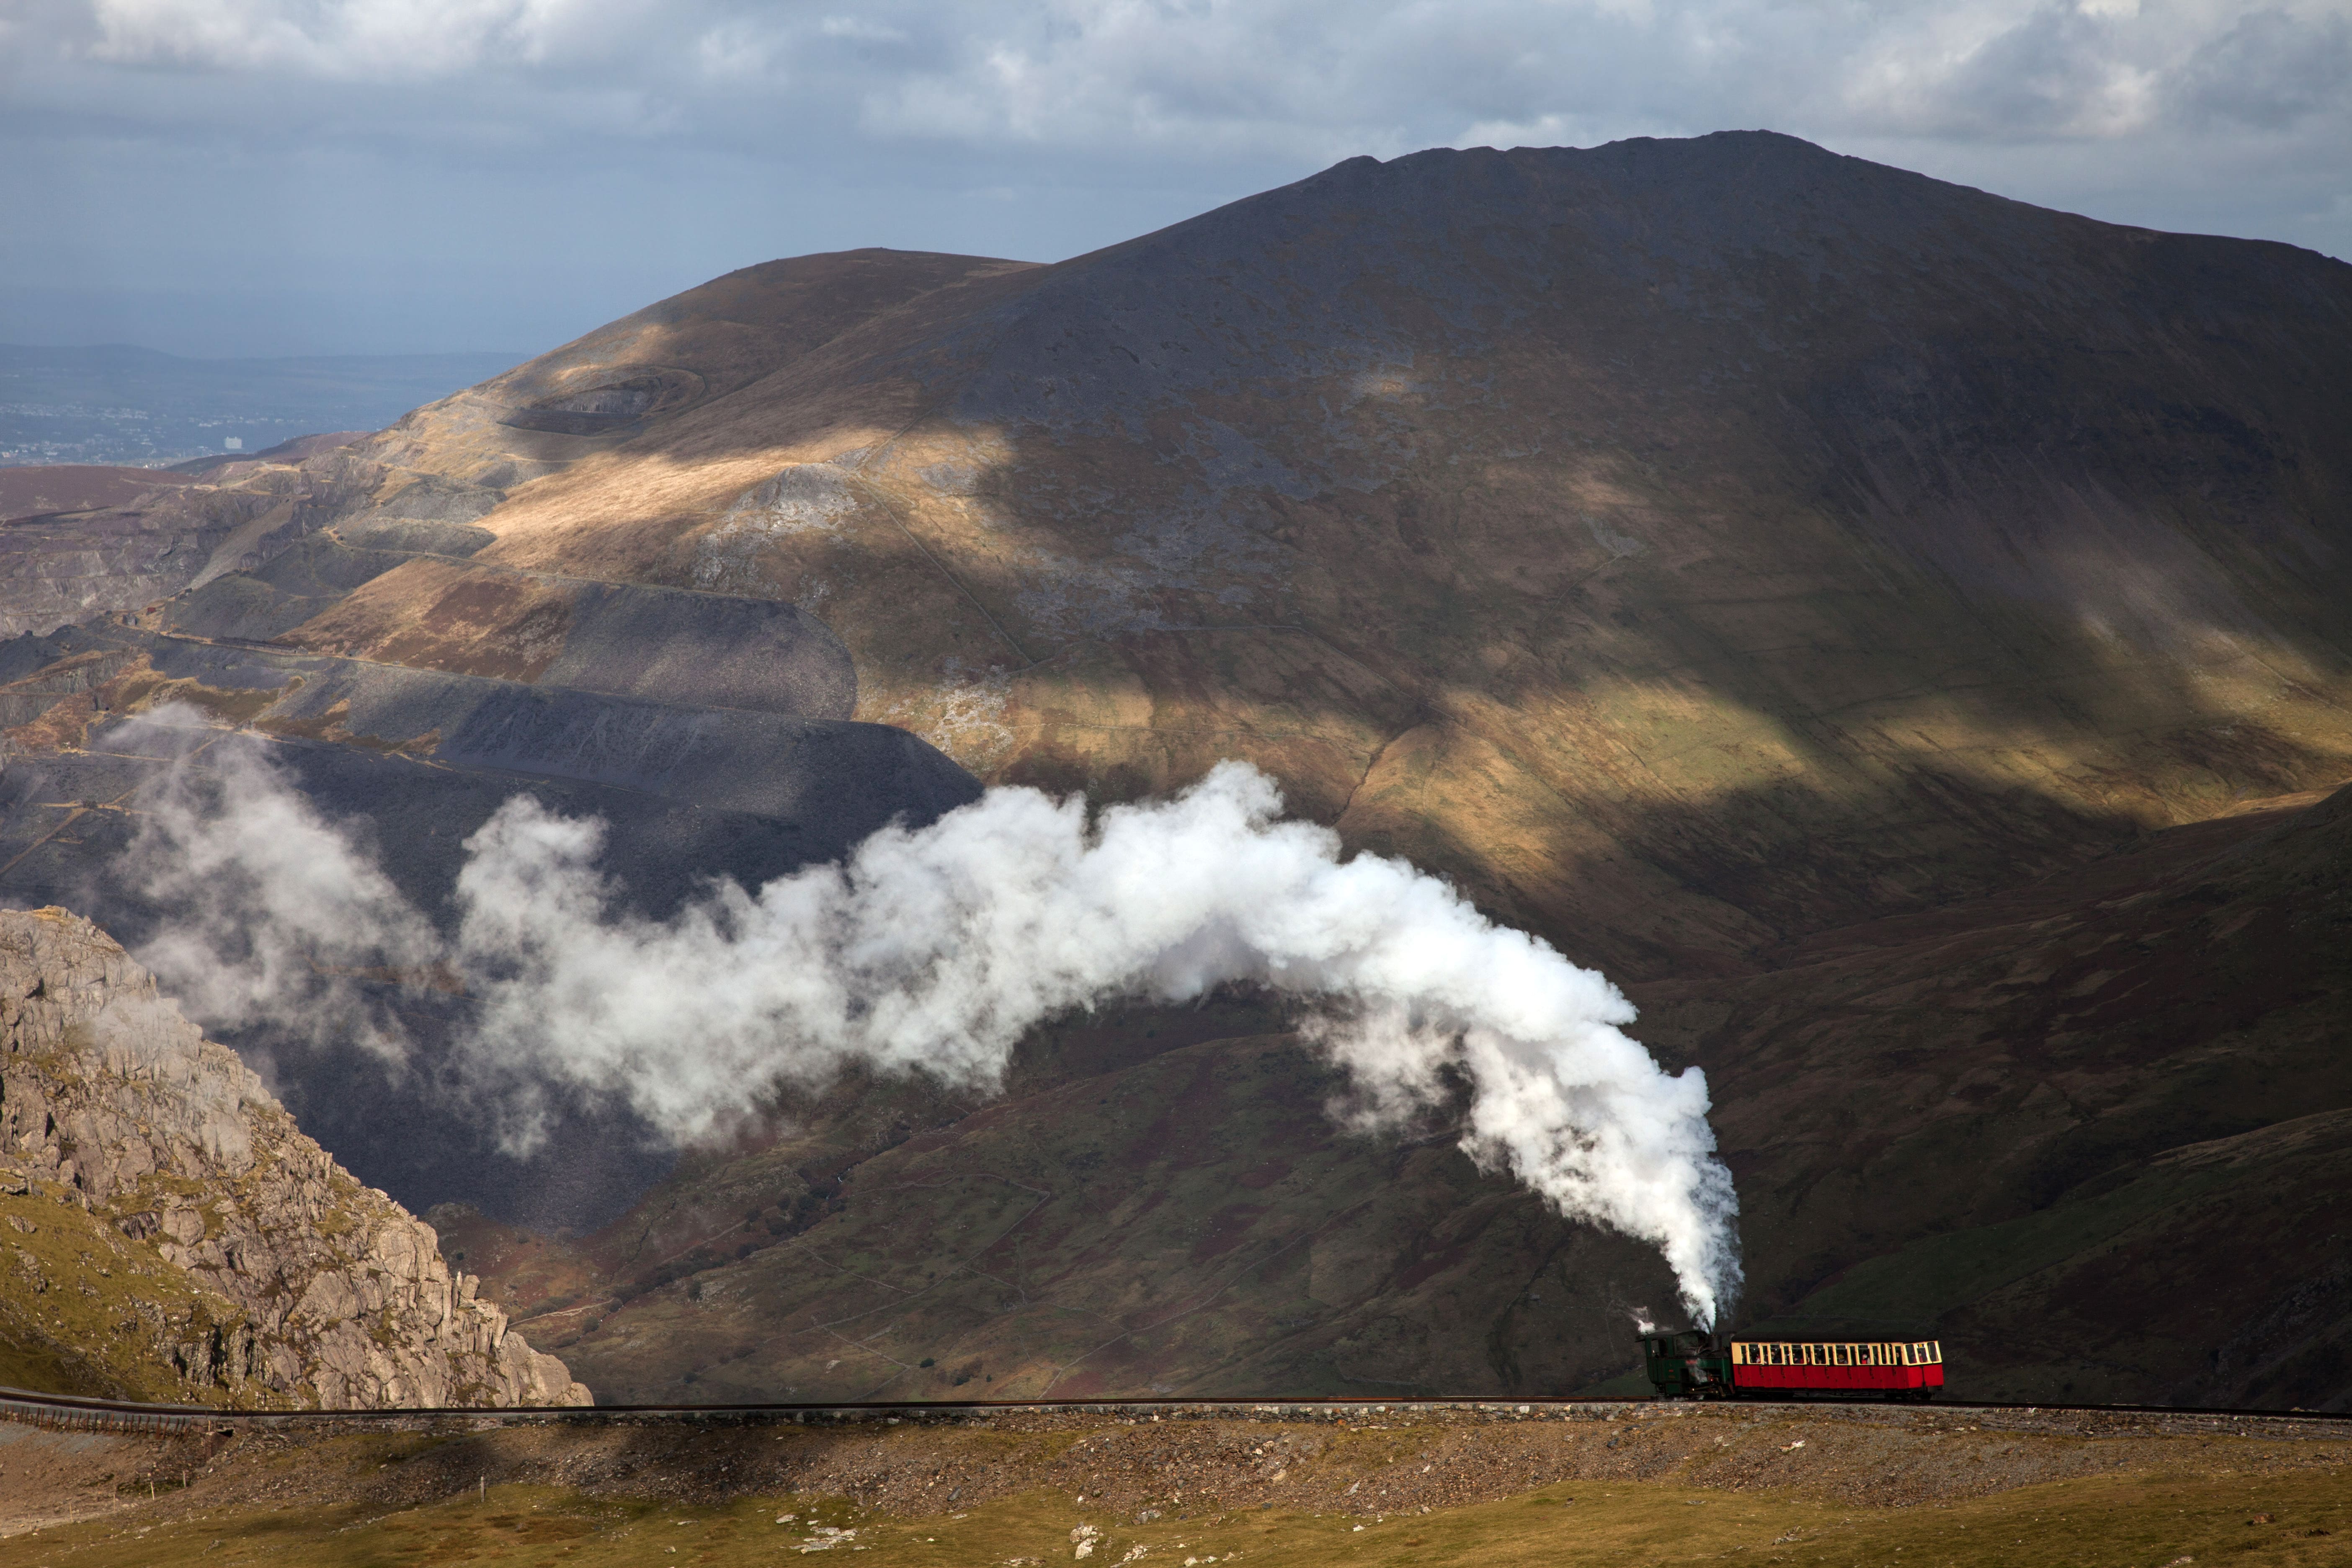 The narrow-gauge passenger railway to the top of Snowdon, with a steam locomotive and carriage